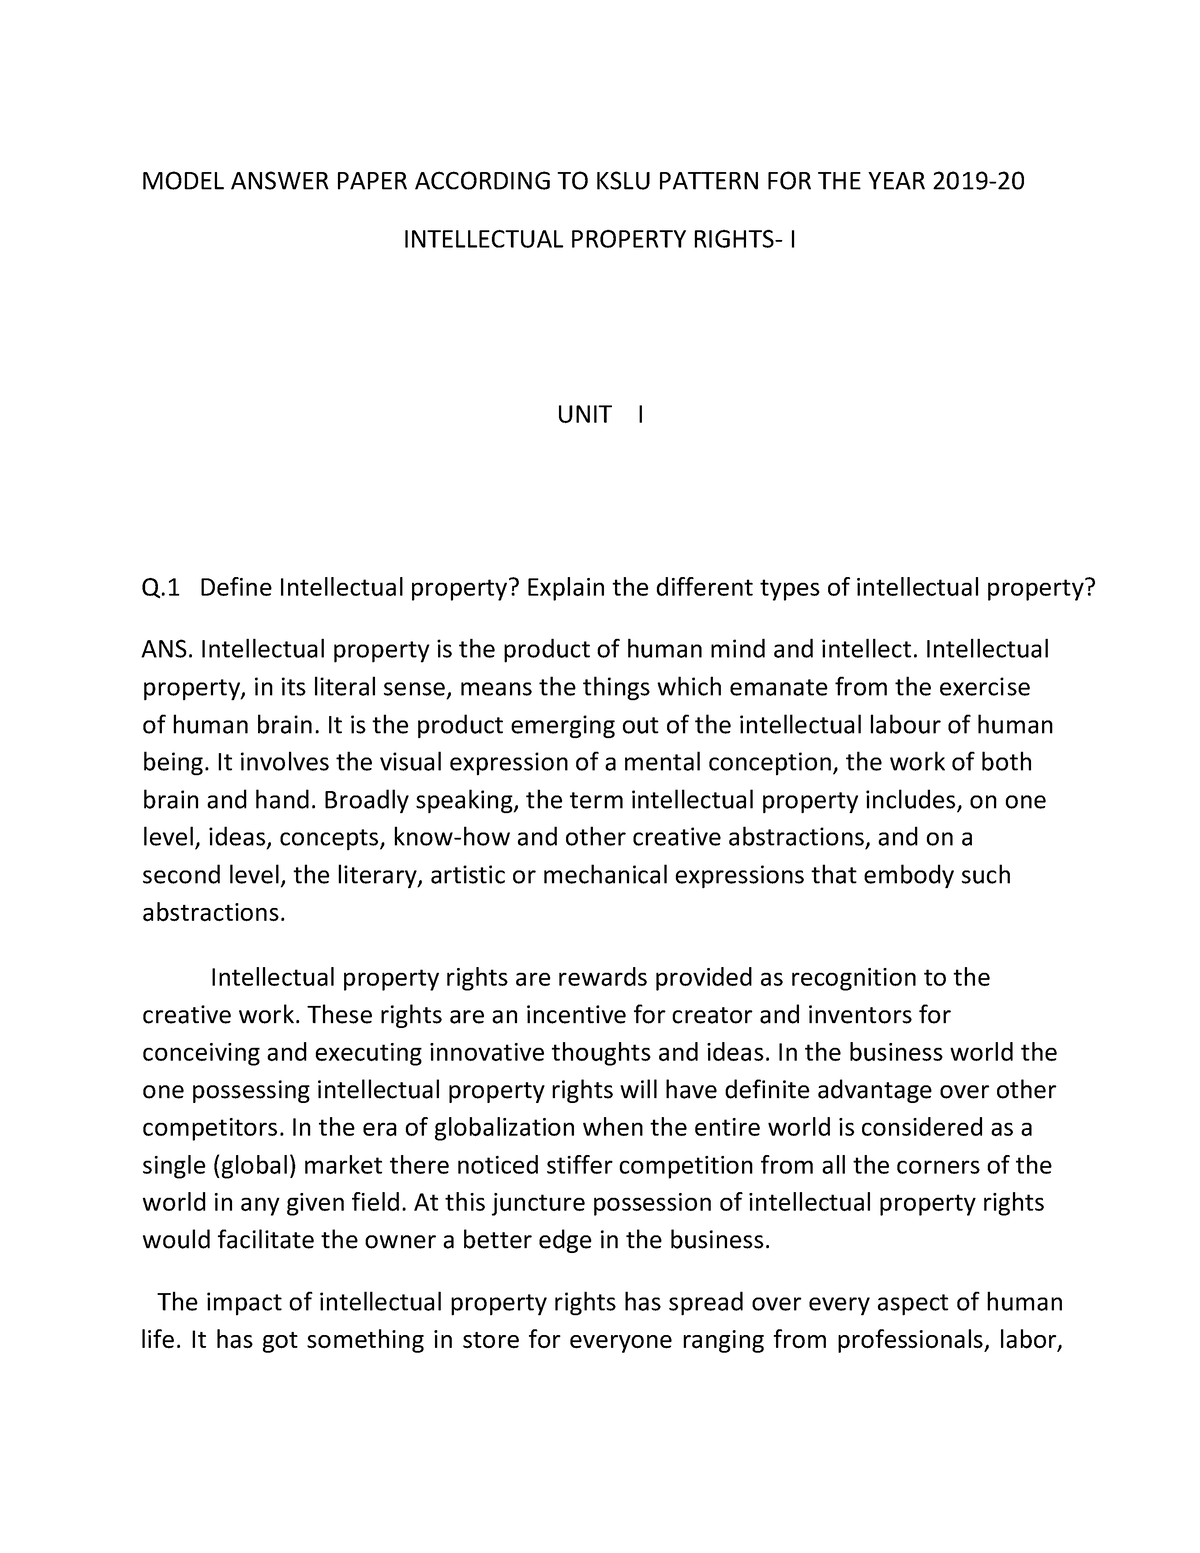 essay questions on intellectual property rights